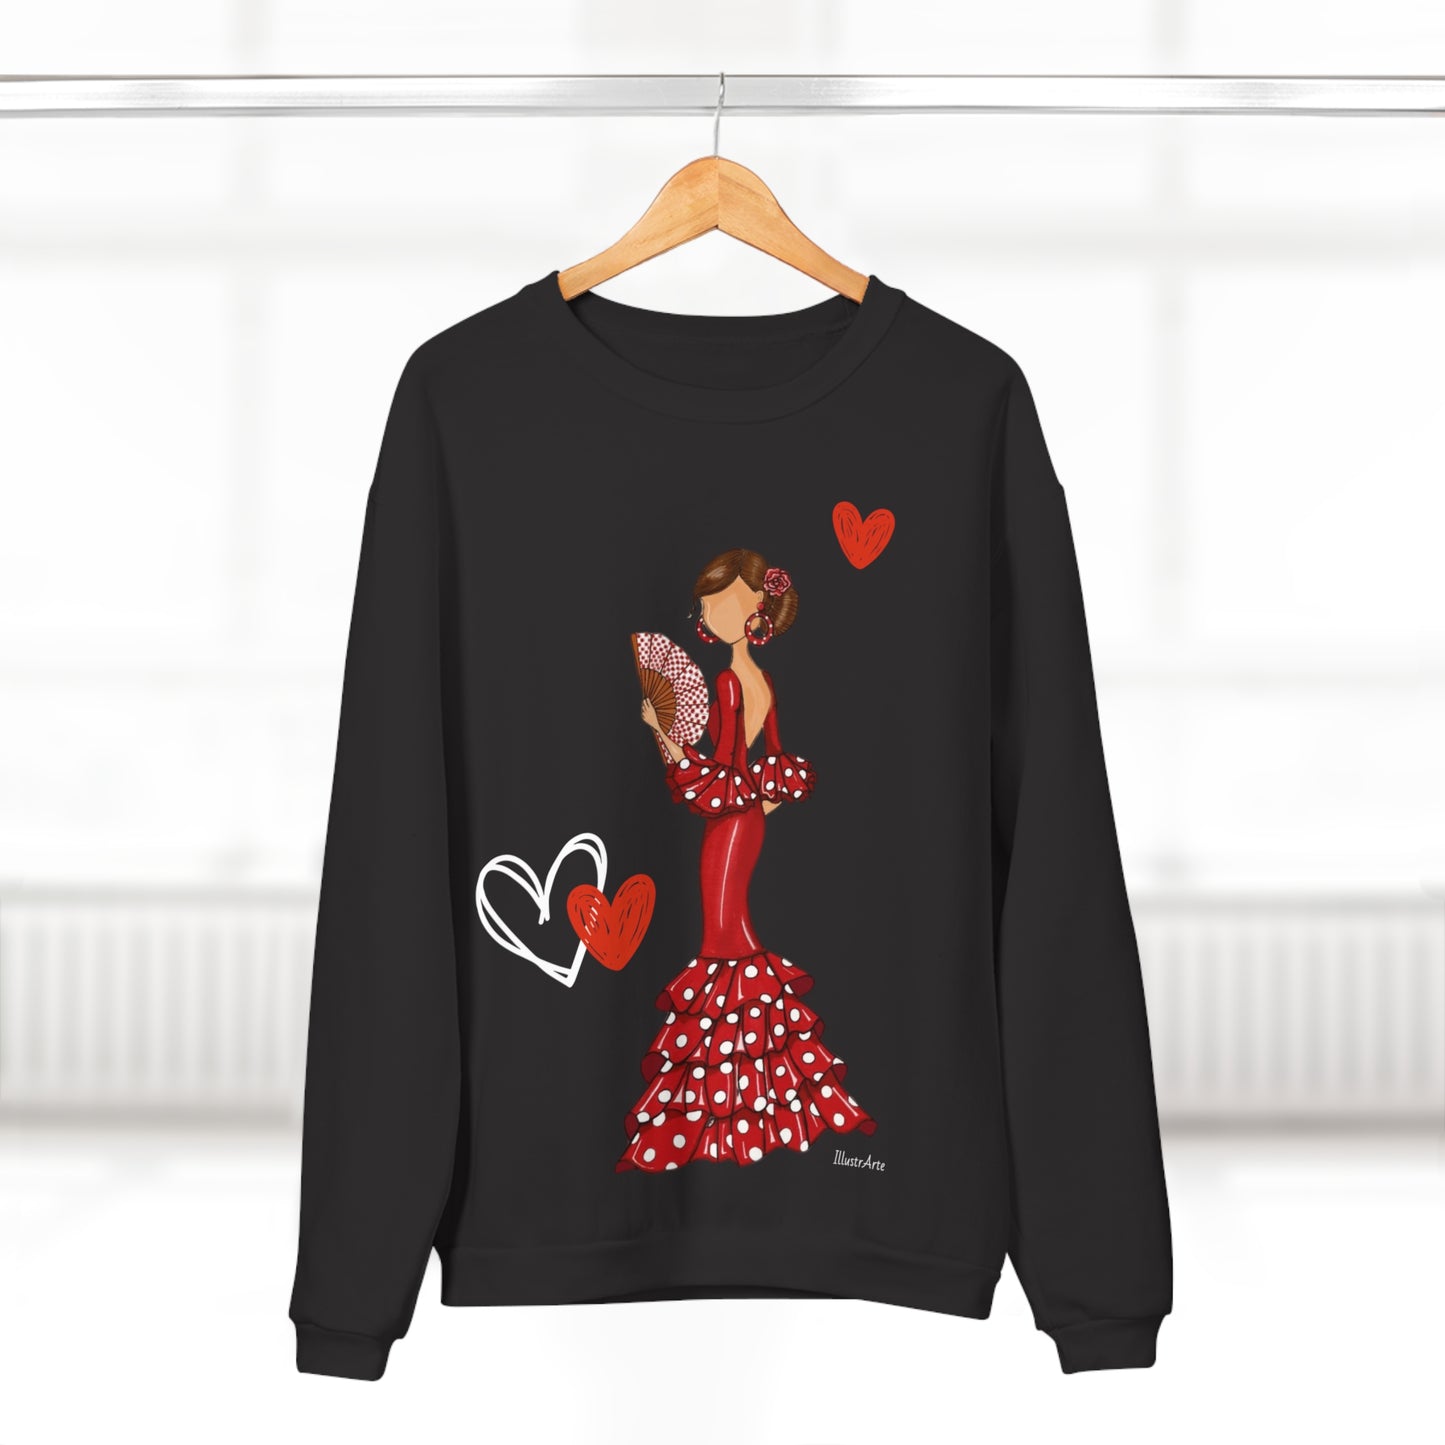 a black sweater with a woman in a red dress and hearts on it